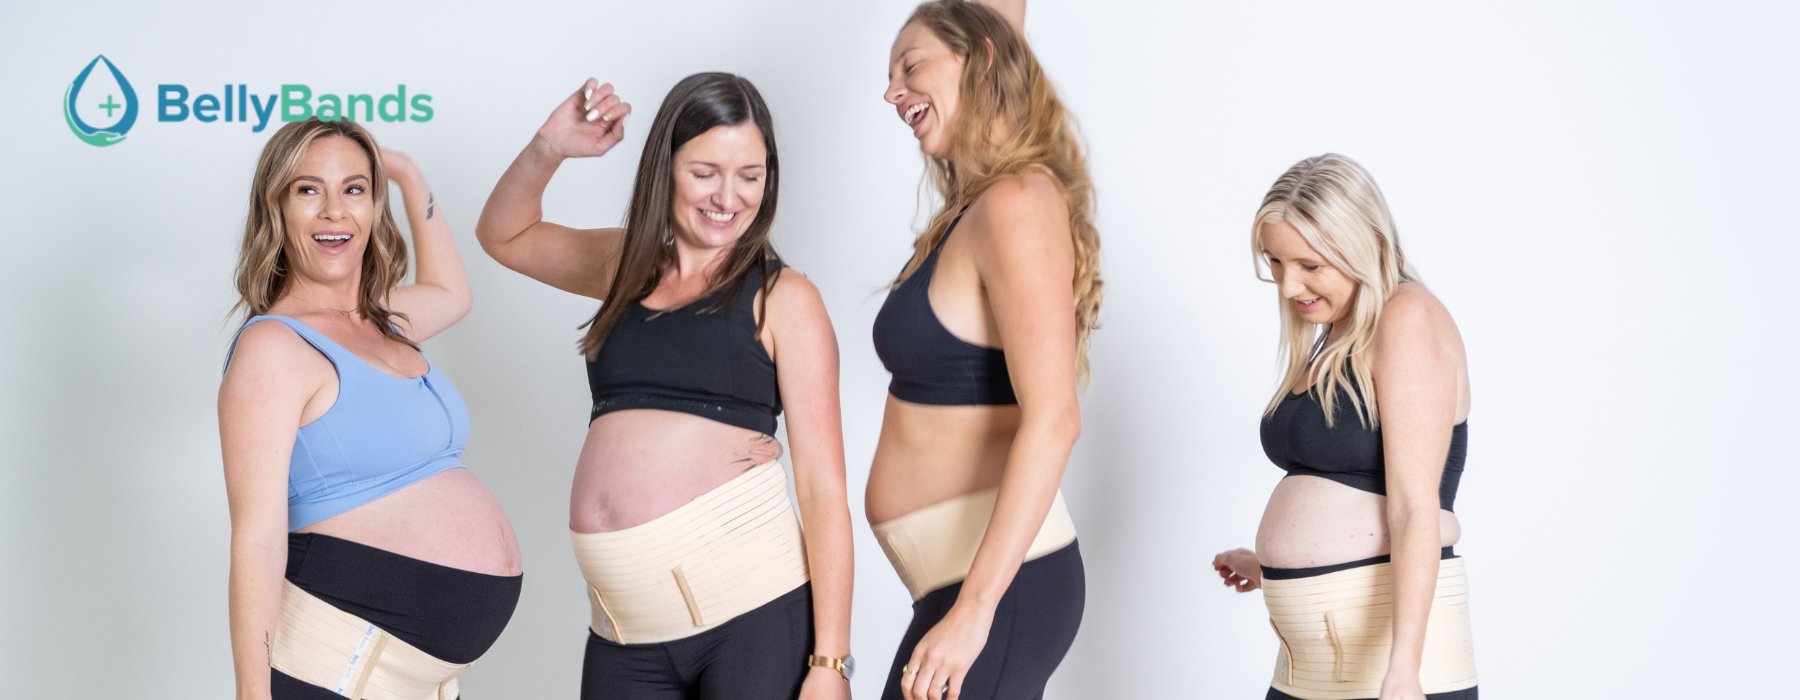 Trouble sleeping while pregnant? Here’s what to do - Belly Bands